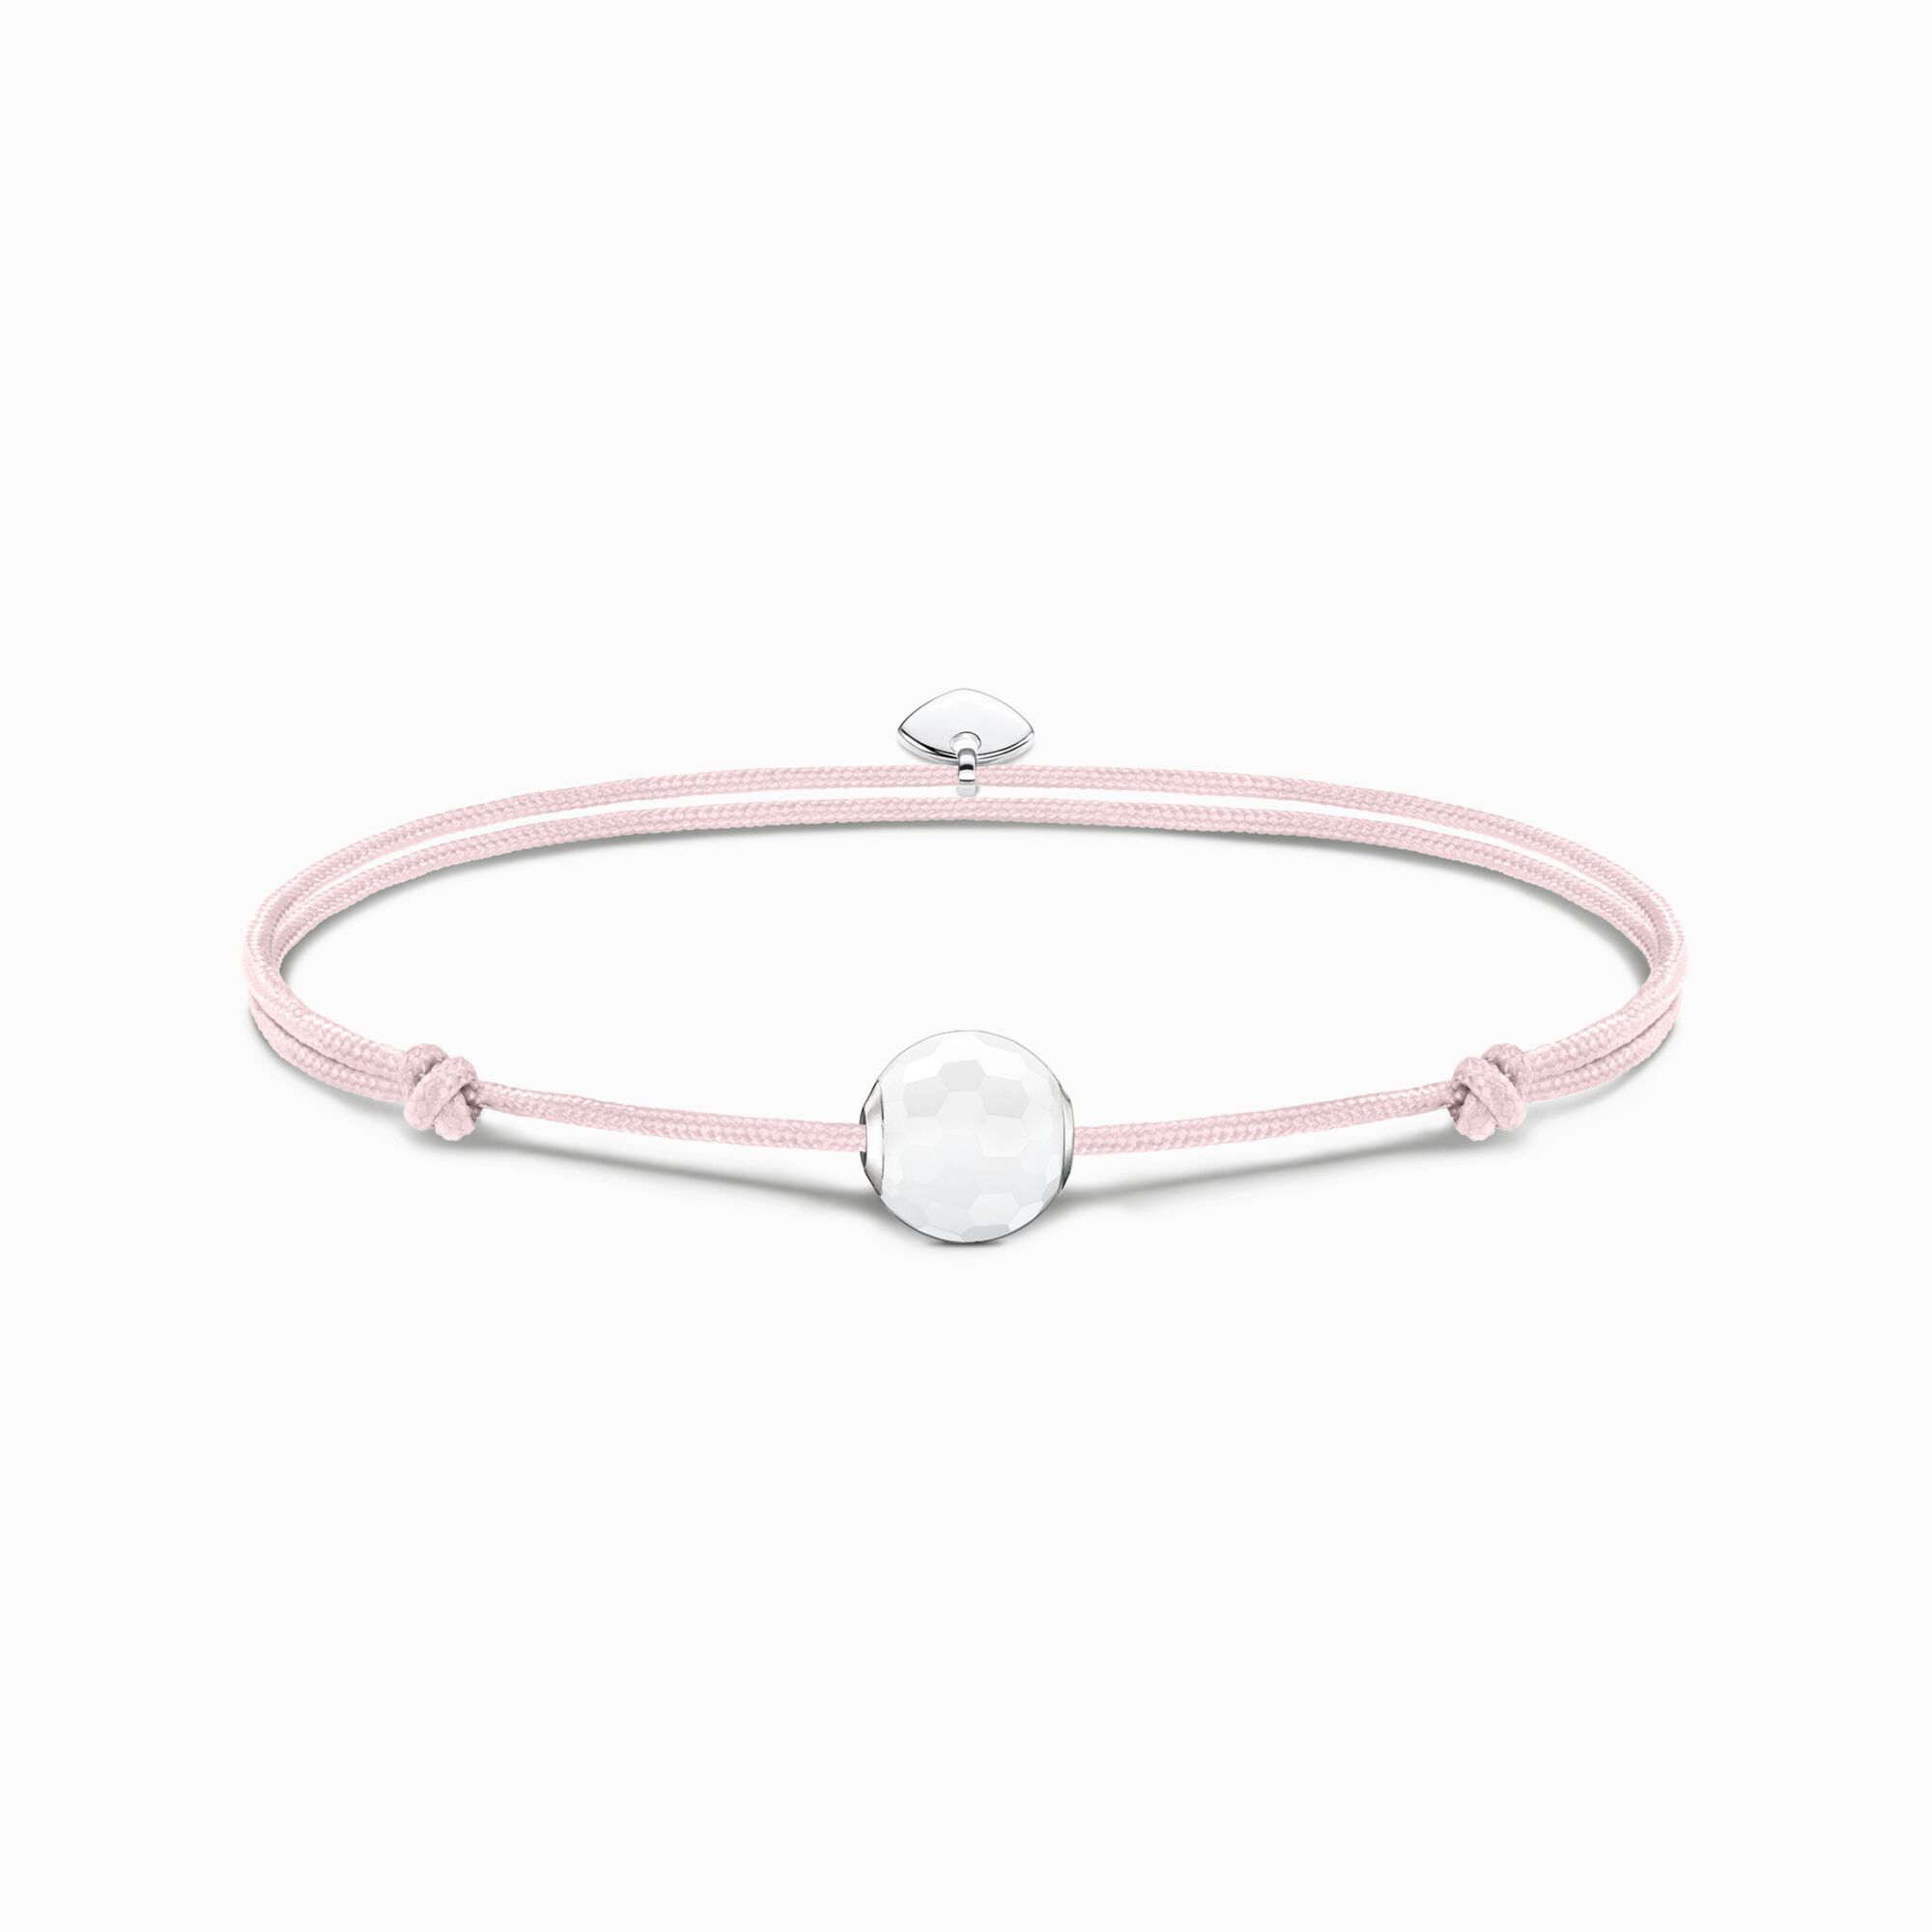 Bracelet Karma Secret with white jade Bead from the Karma Beads collection in the THOMAS SABO online store